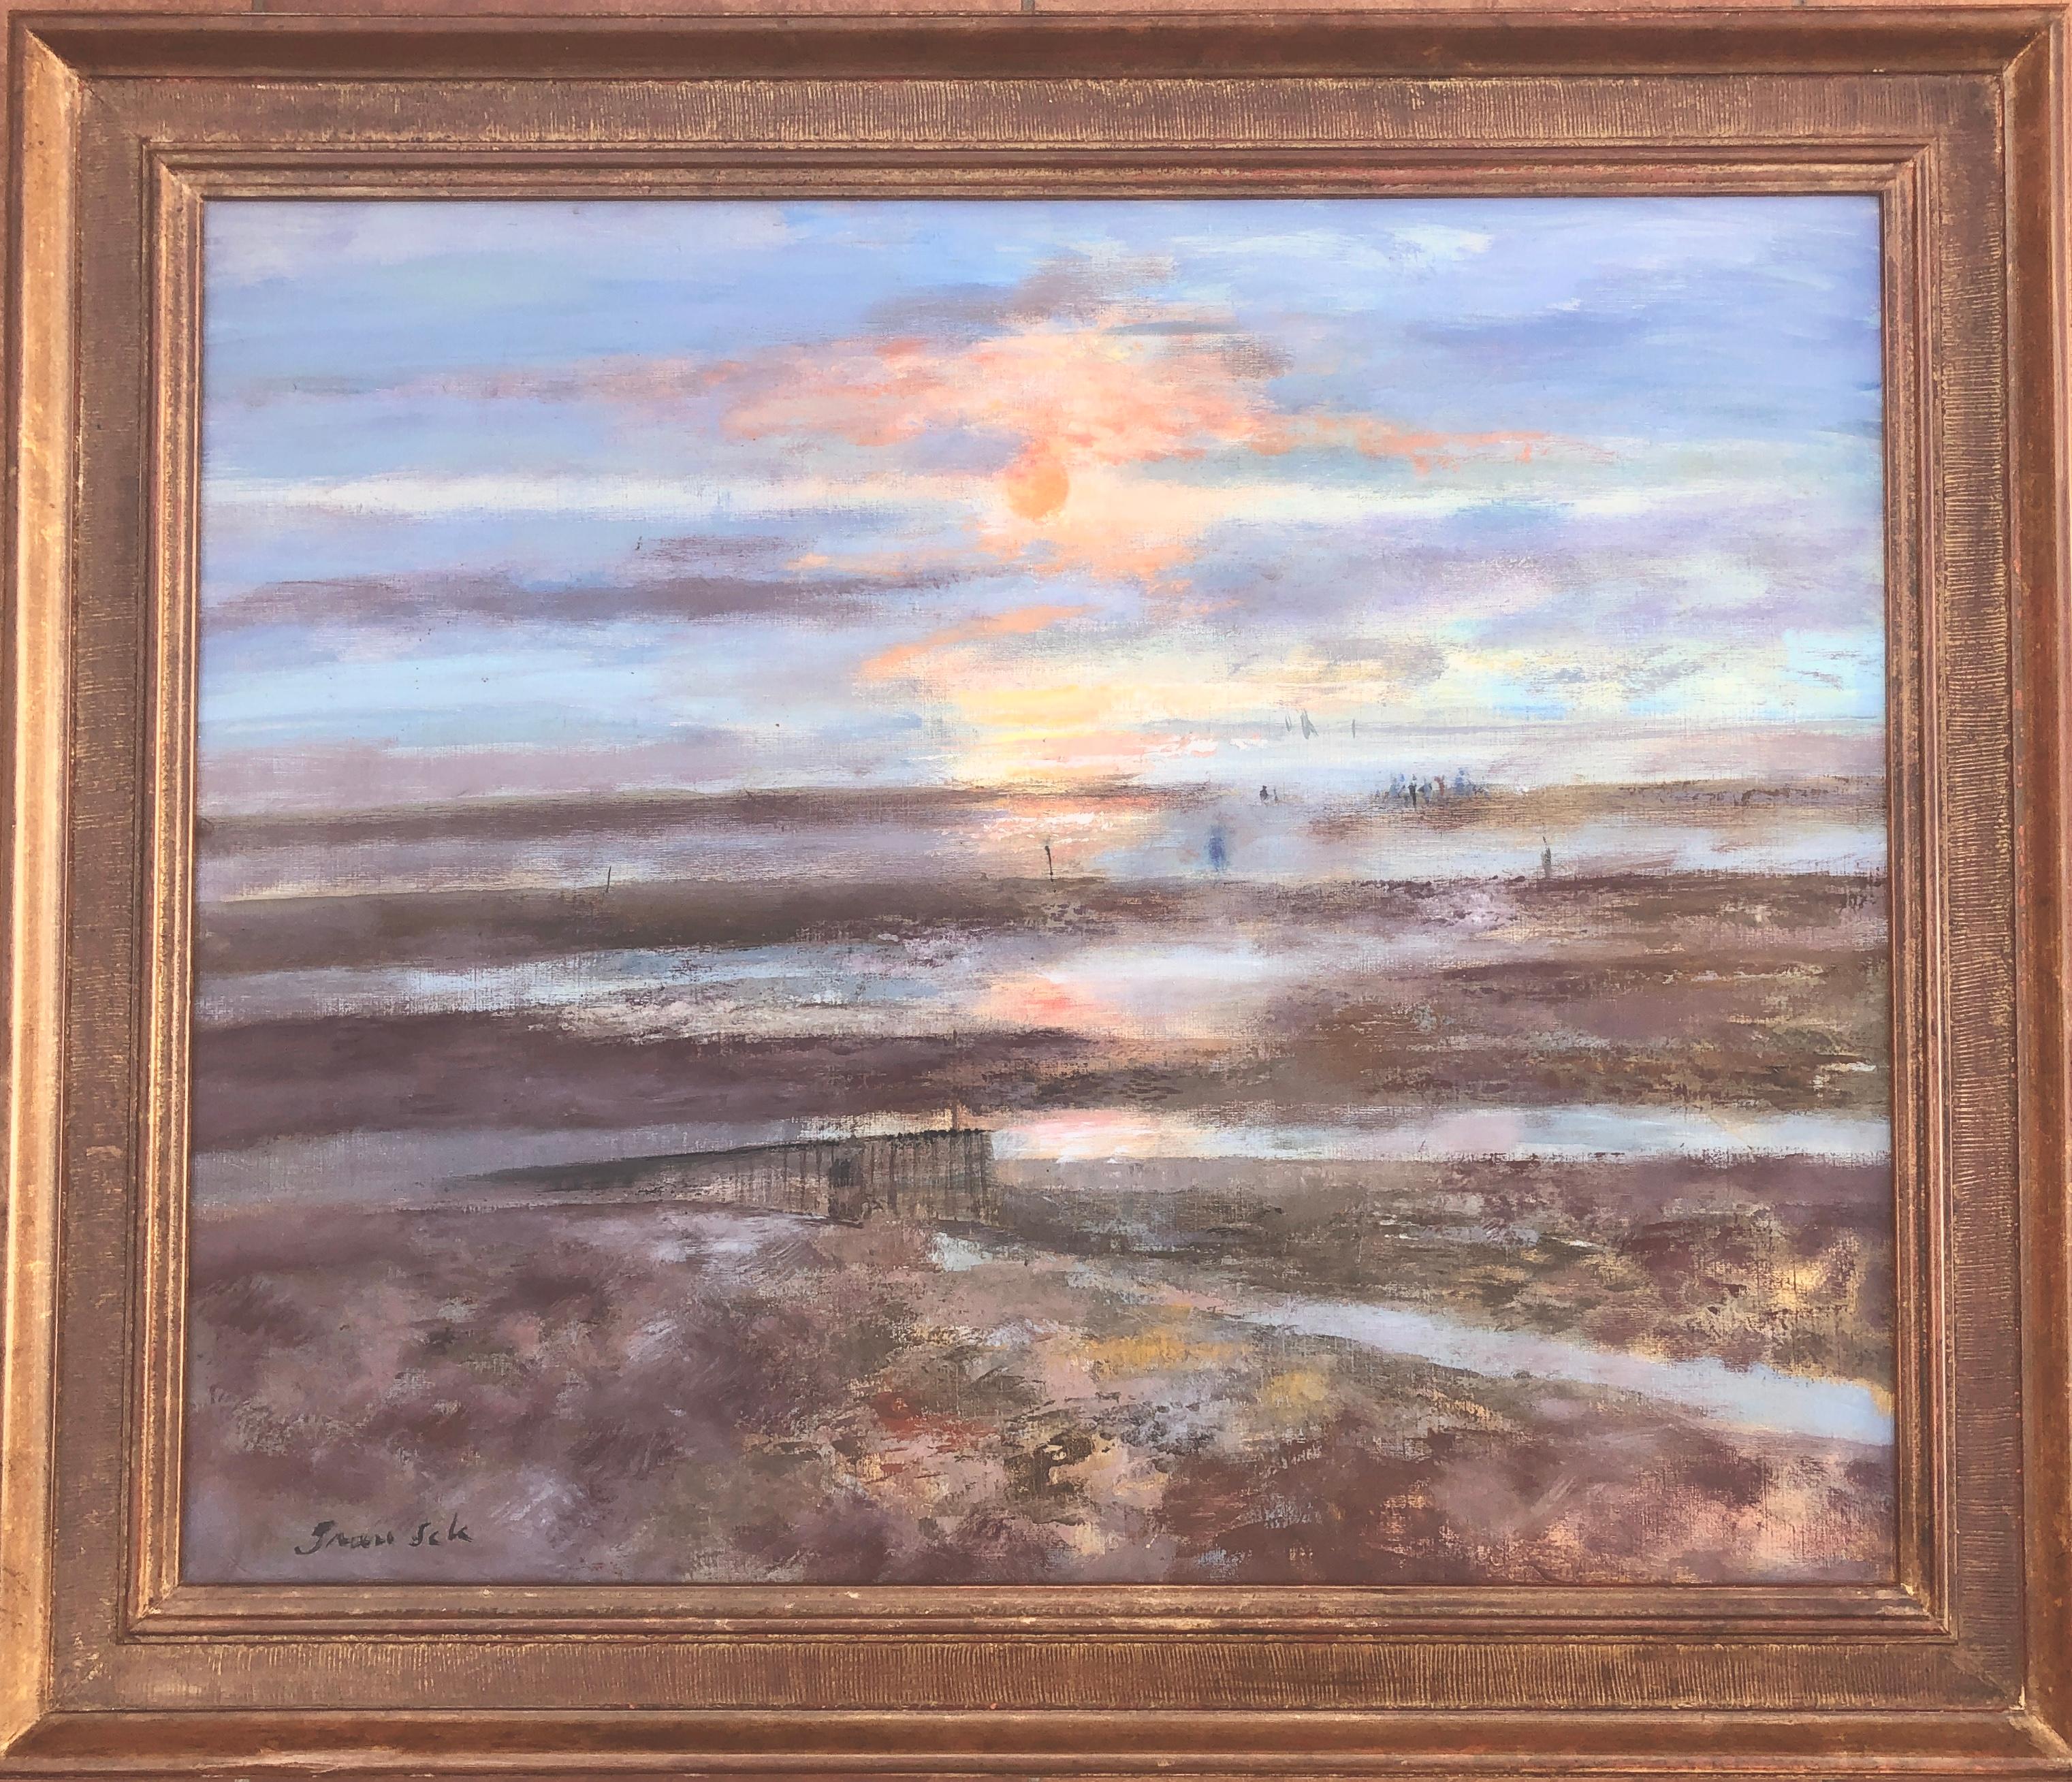 Sunset in Deauville France oil on canvas painting seascape - Painting by Emilio Grau Sala